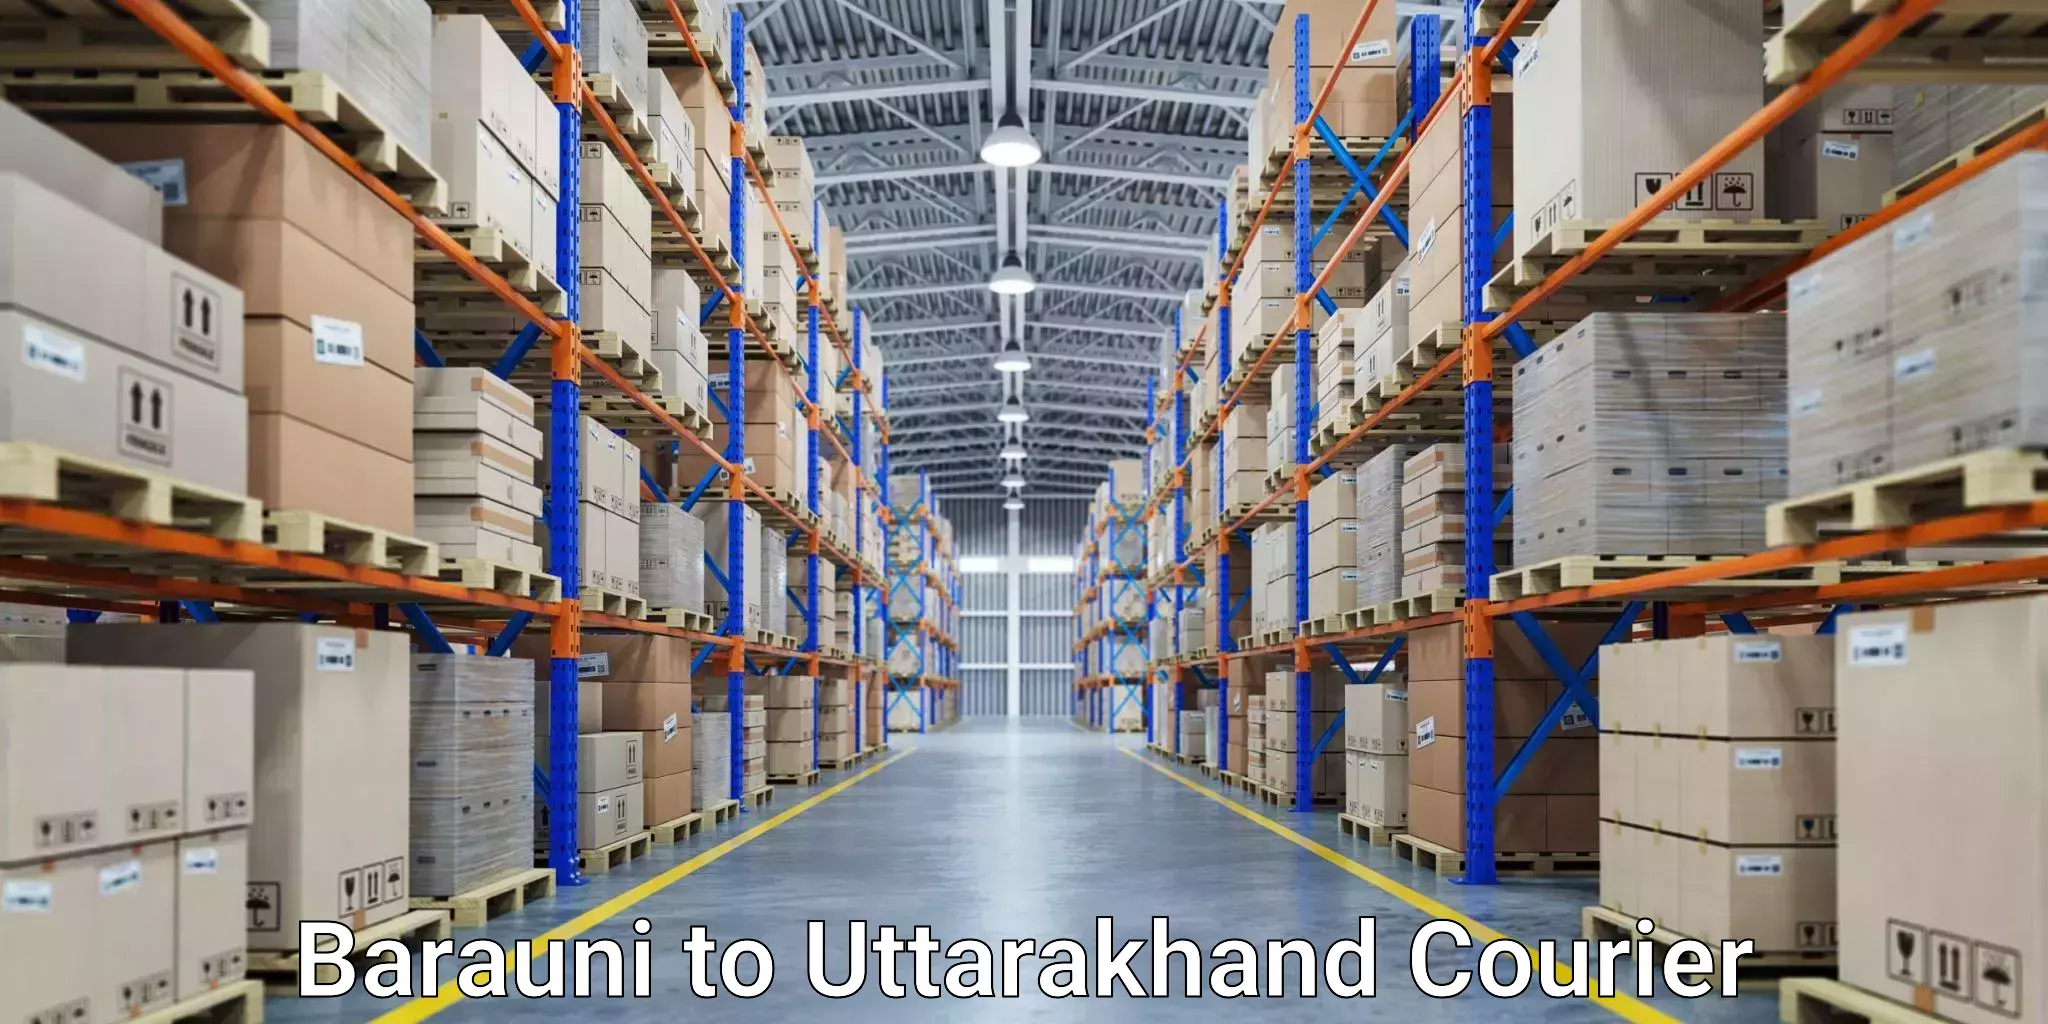 Comprehensive shipping services in Barauni to Rudrapur